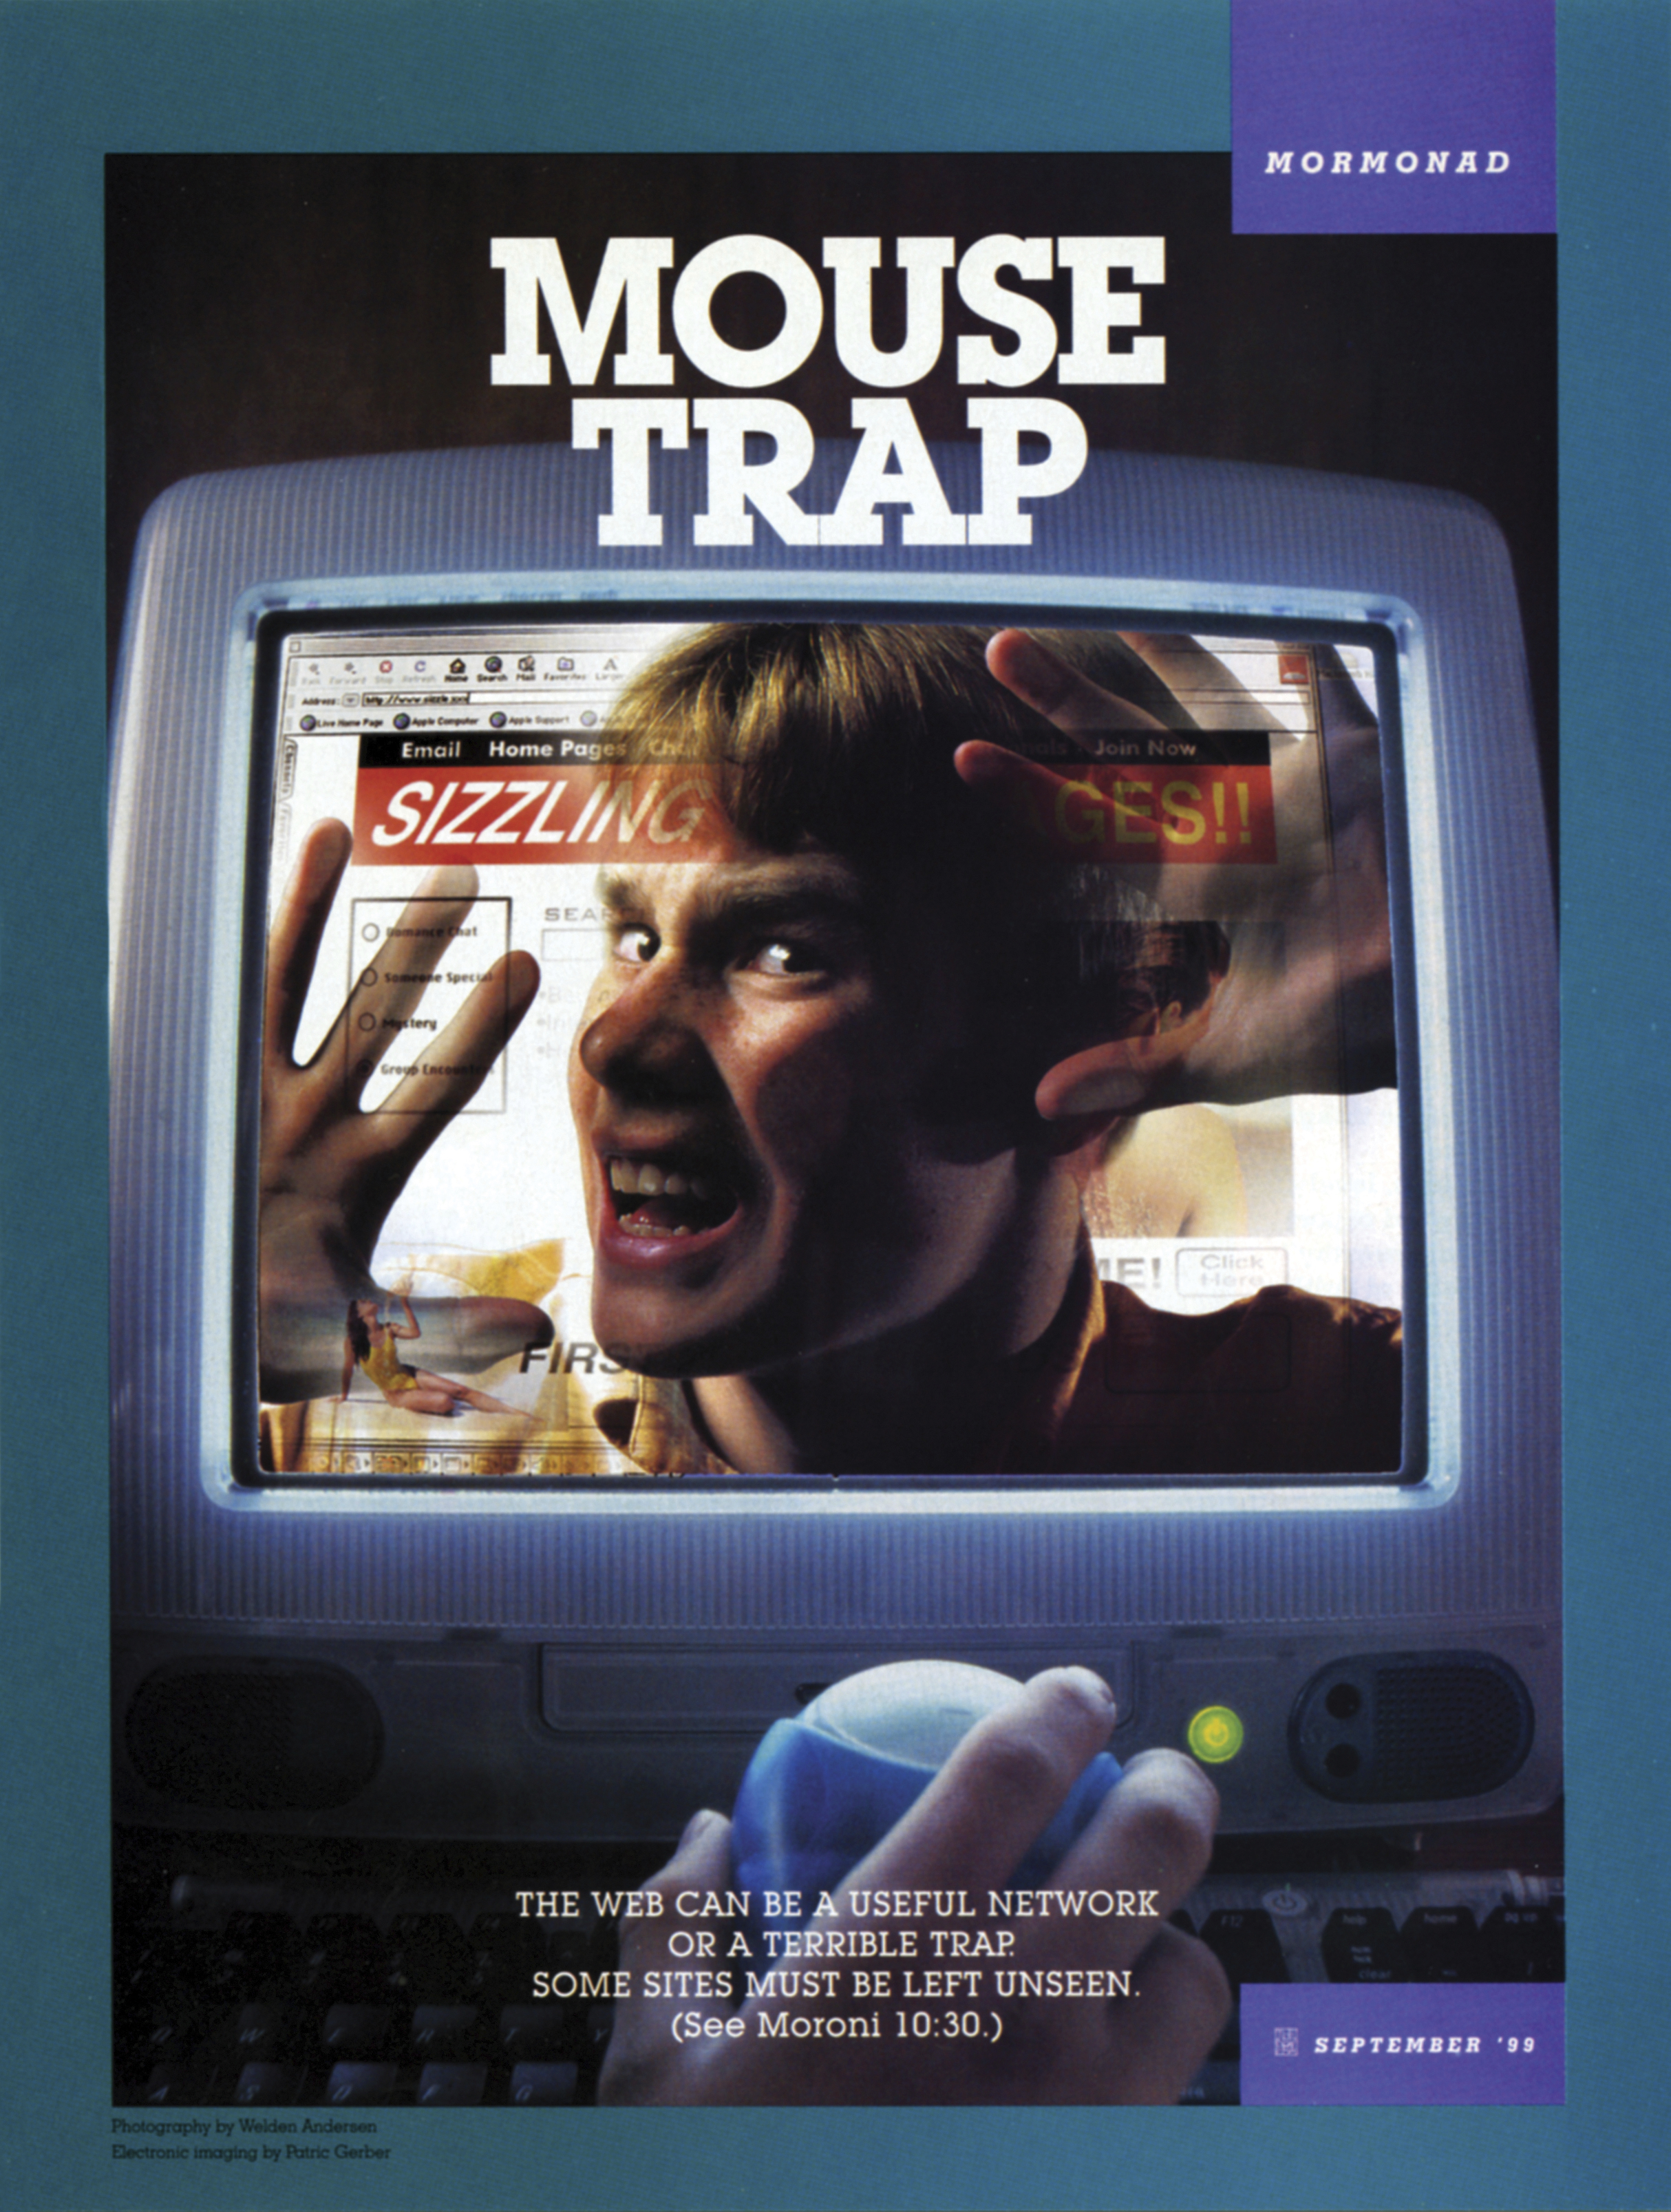 Mouse Trap. The web can be a useful network or a terrible trap. Some sites must be left unseen. (See Moroni 10:30.) Sept. 1999 © undefined ipCode 1.